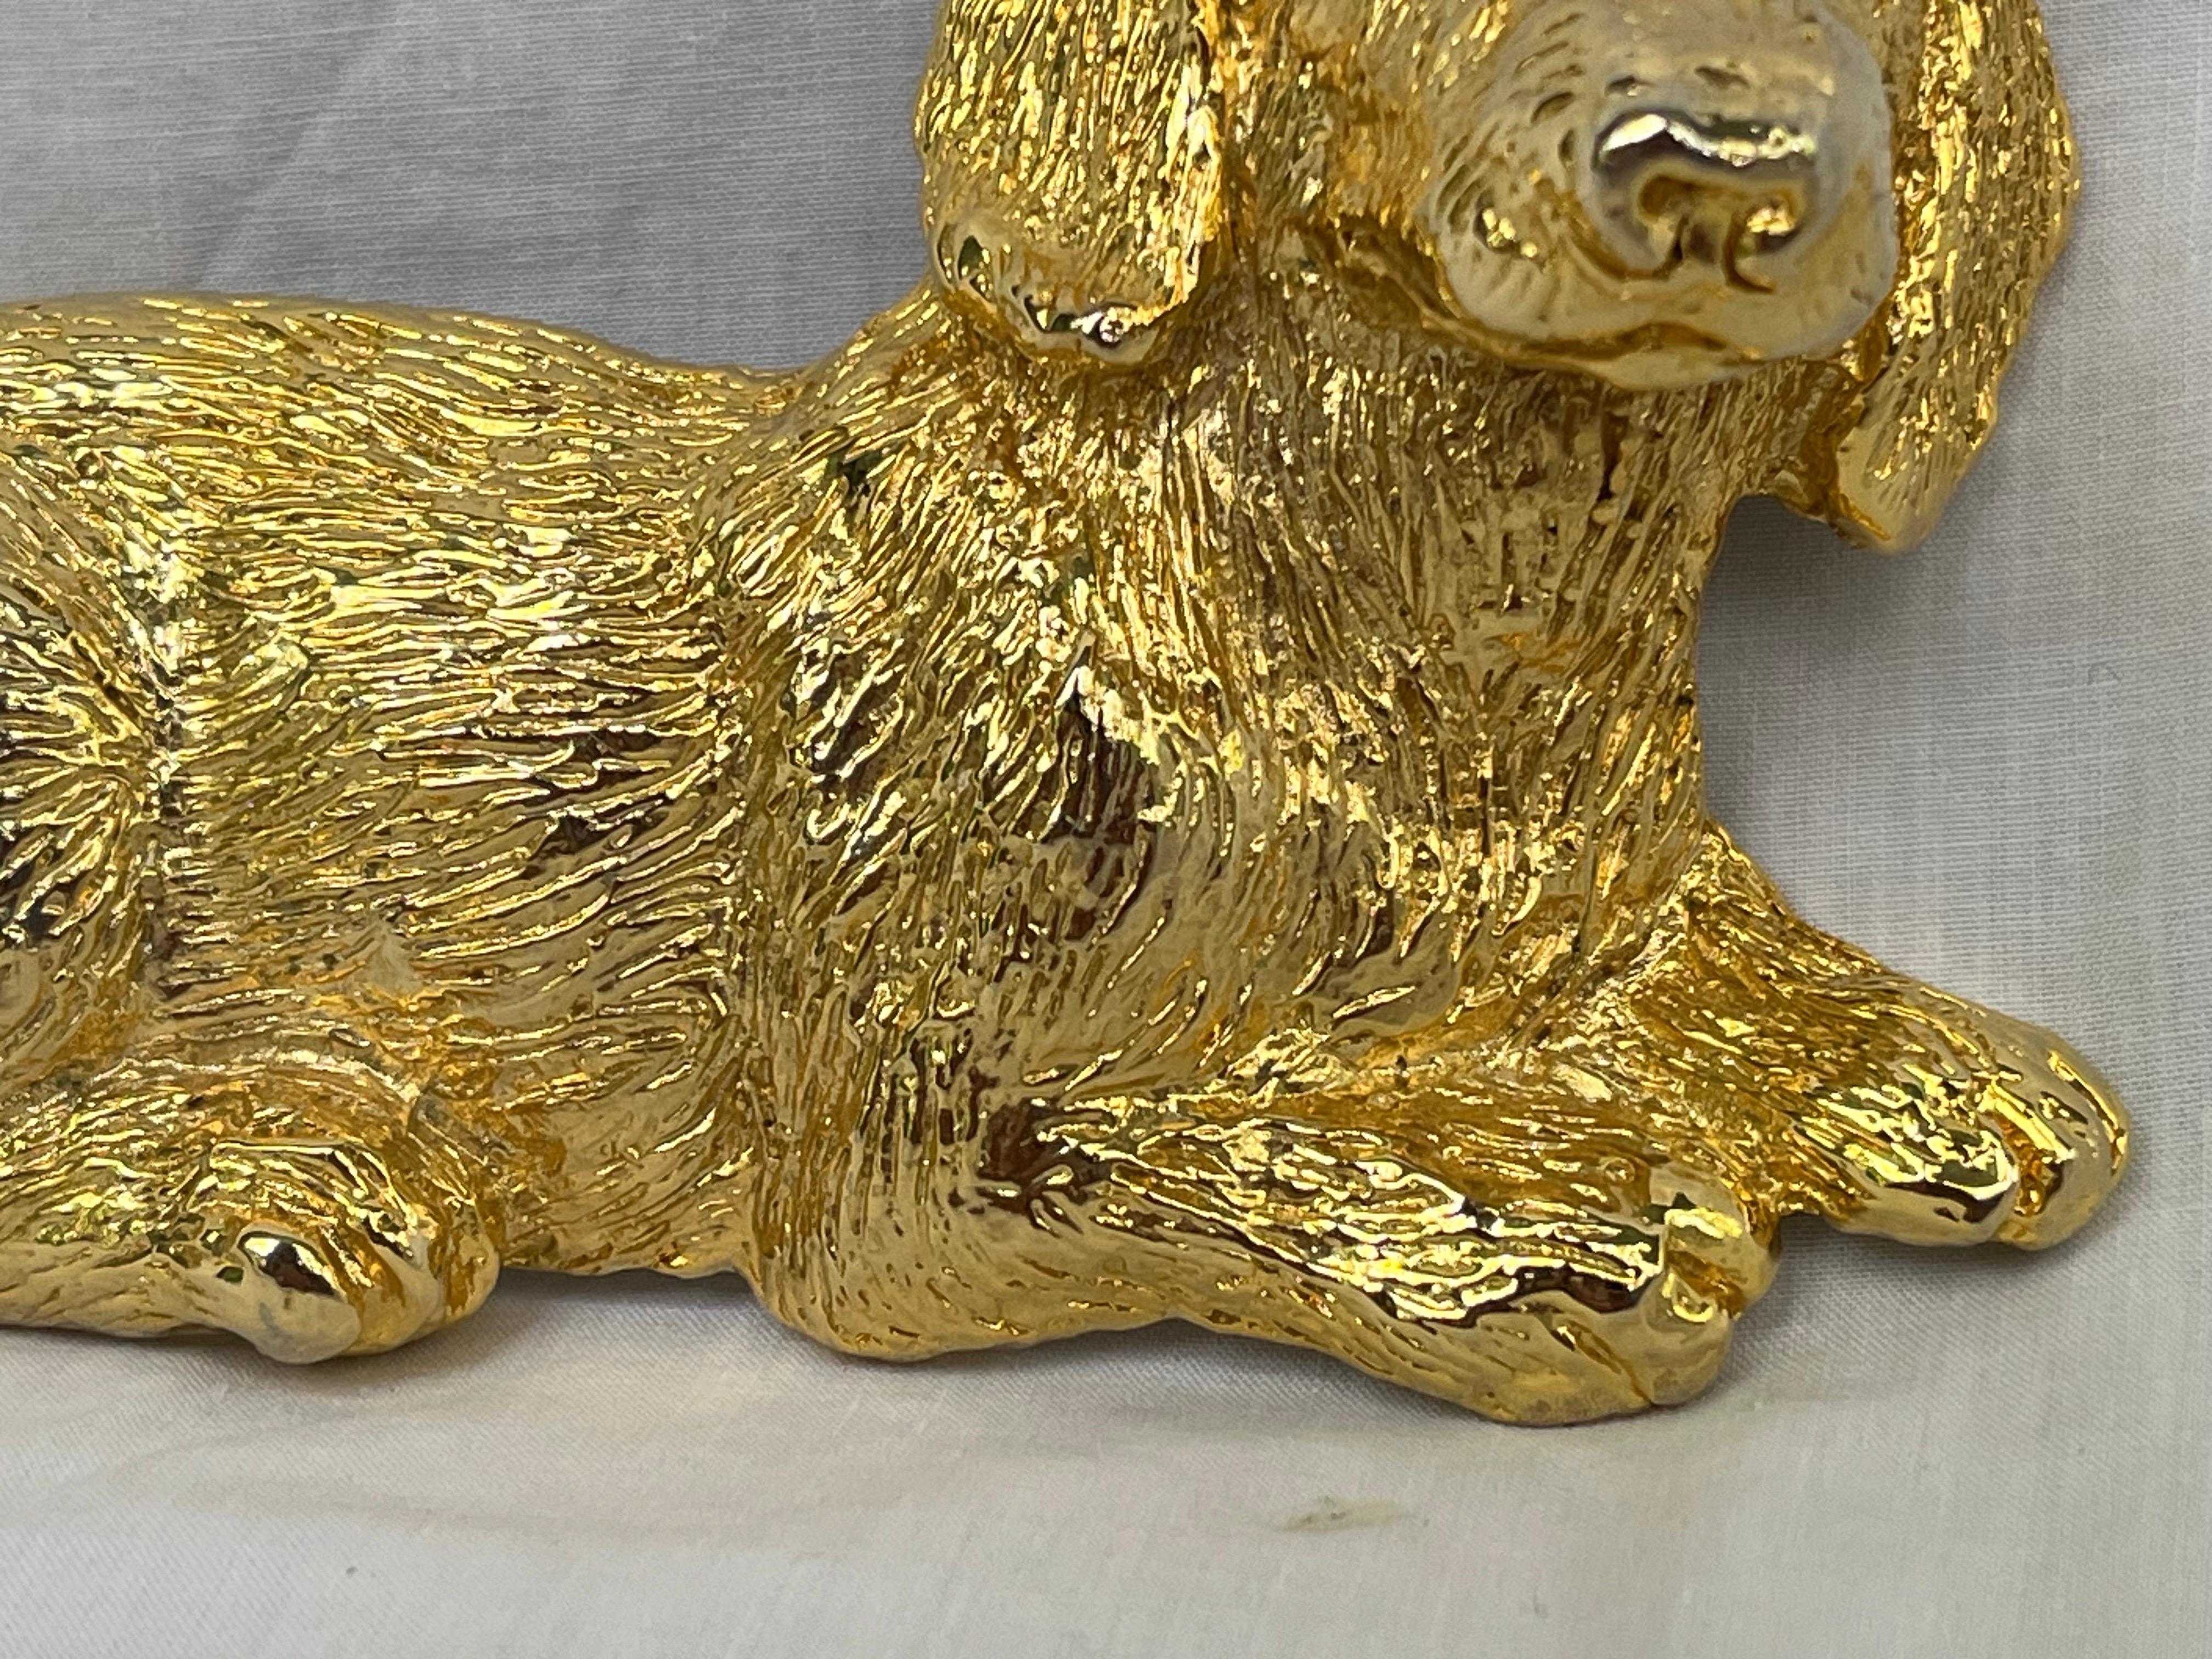 20th Century Vintage 1992 Mimi Di Niscemi Signed Golden Dachshund Belt Buckle with Brown Eyes